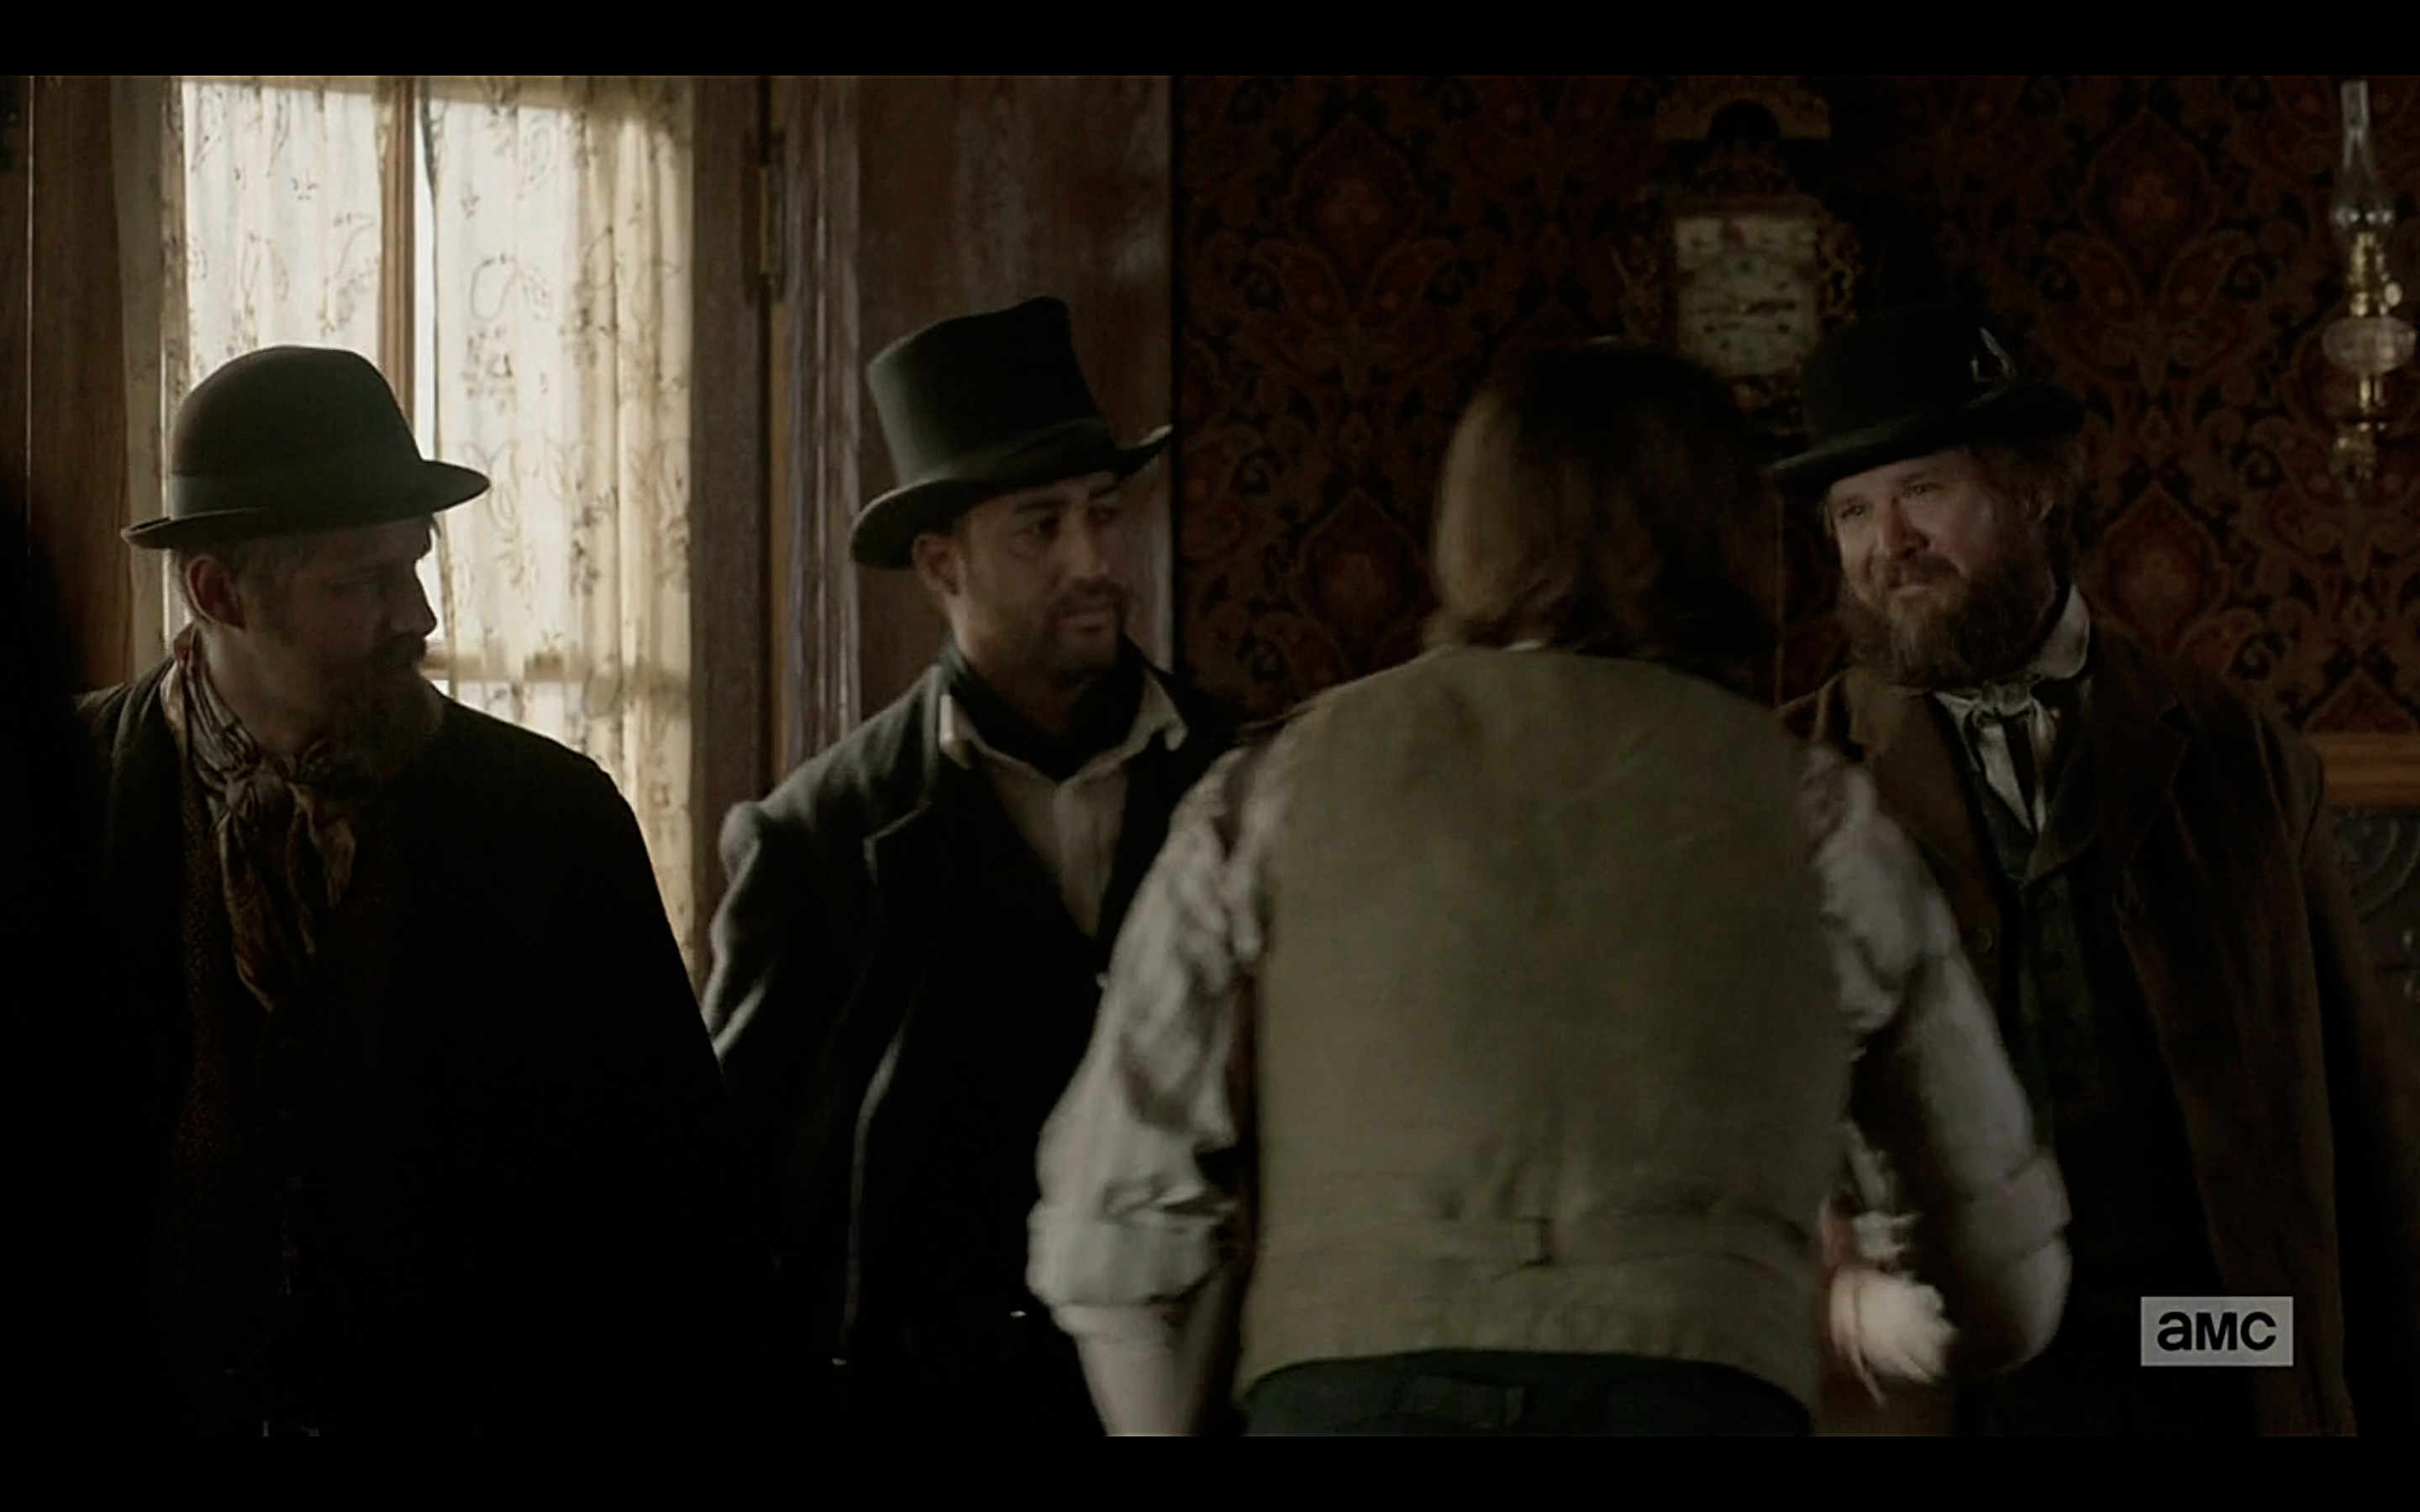 Meeting up with #PhilBurke aka Mickey McGinnes in the whorehouse to snag a few lovely freebie whores to help me shake the dust off after a long ride from New York to Cheyenne. #deadrabbits. #hellonwheels episode 4.11 #bleedingkansas